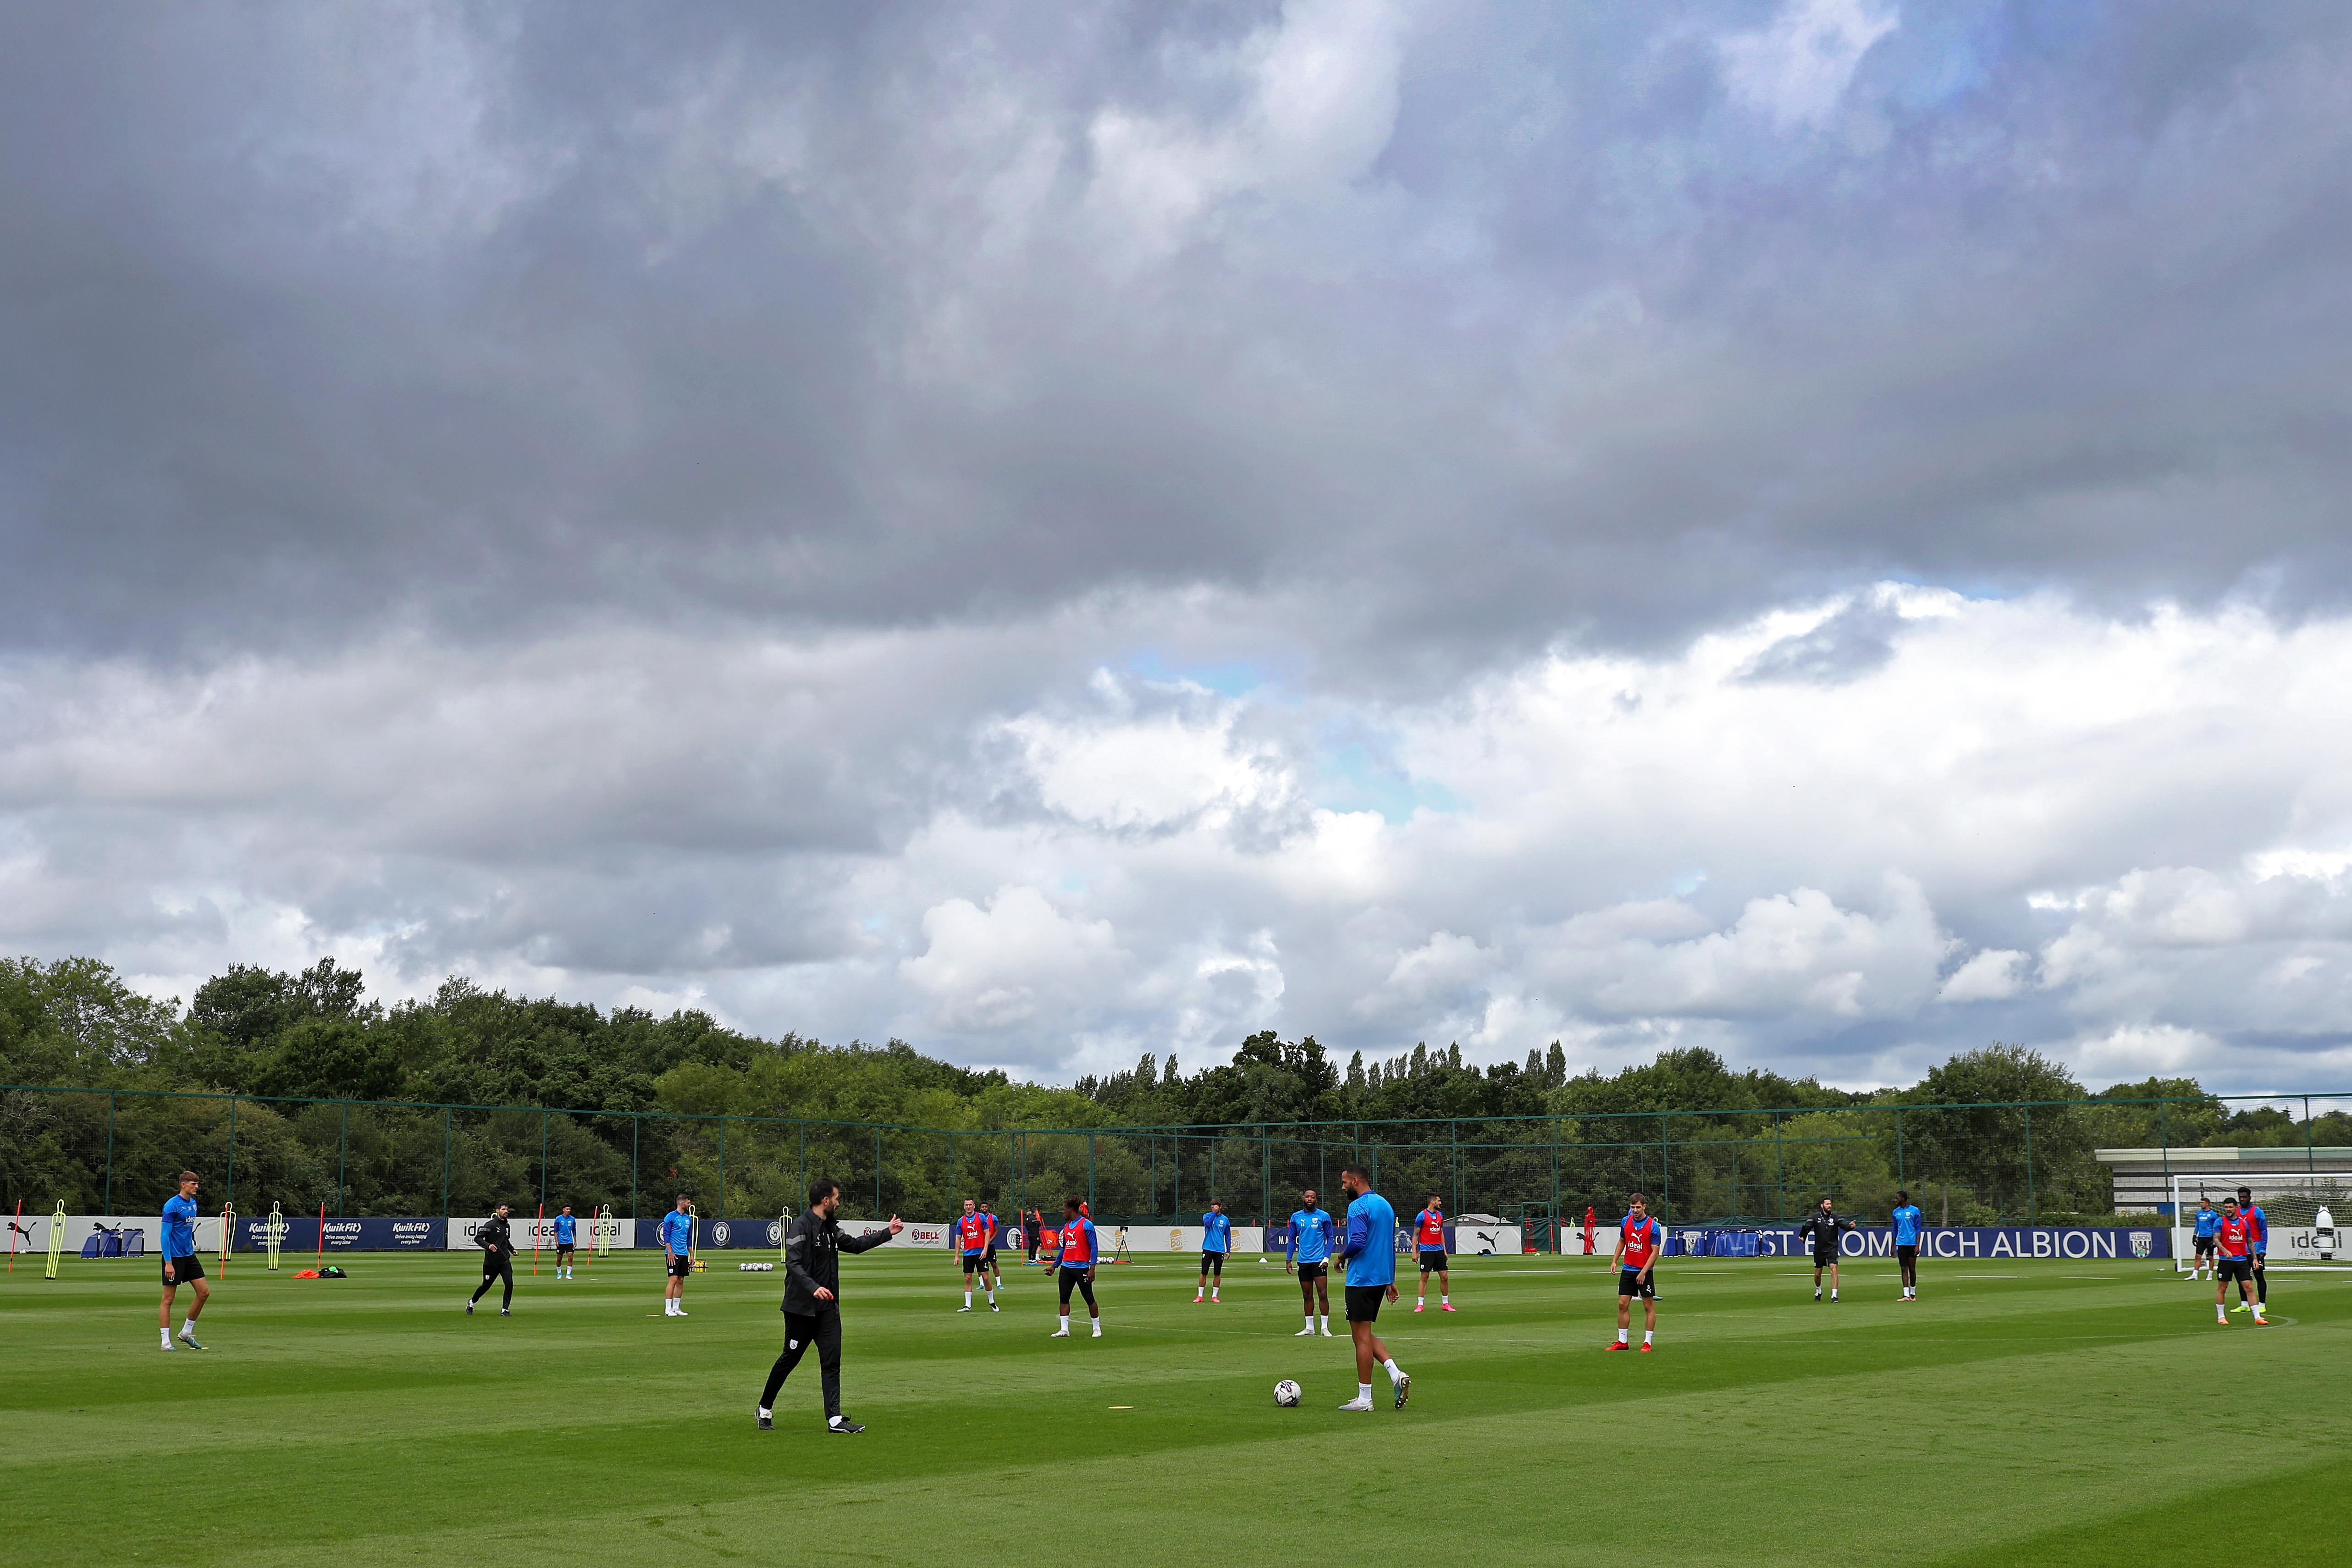 A wide angle of the training pitch with several players in the background